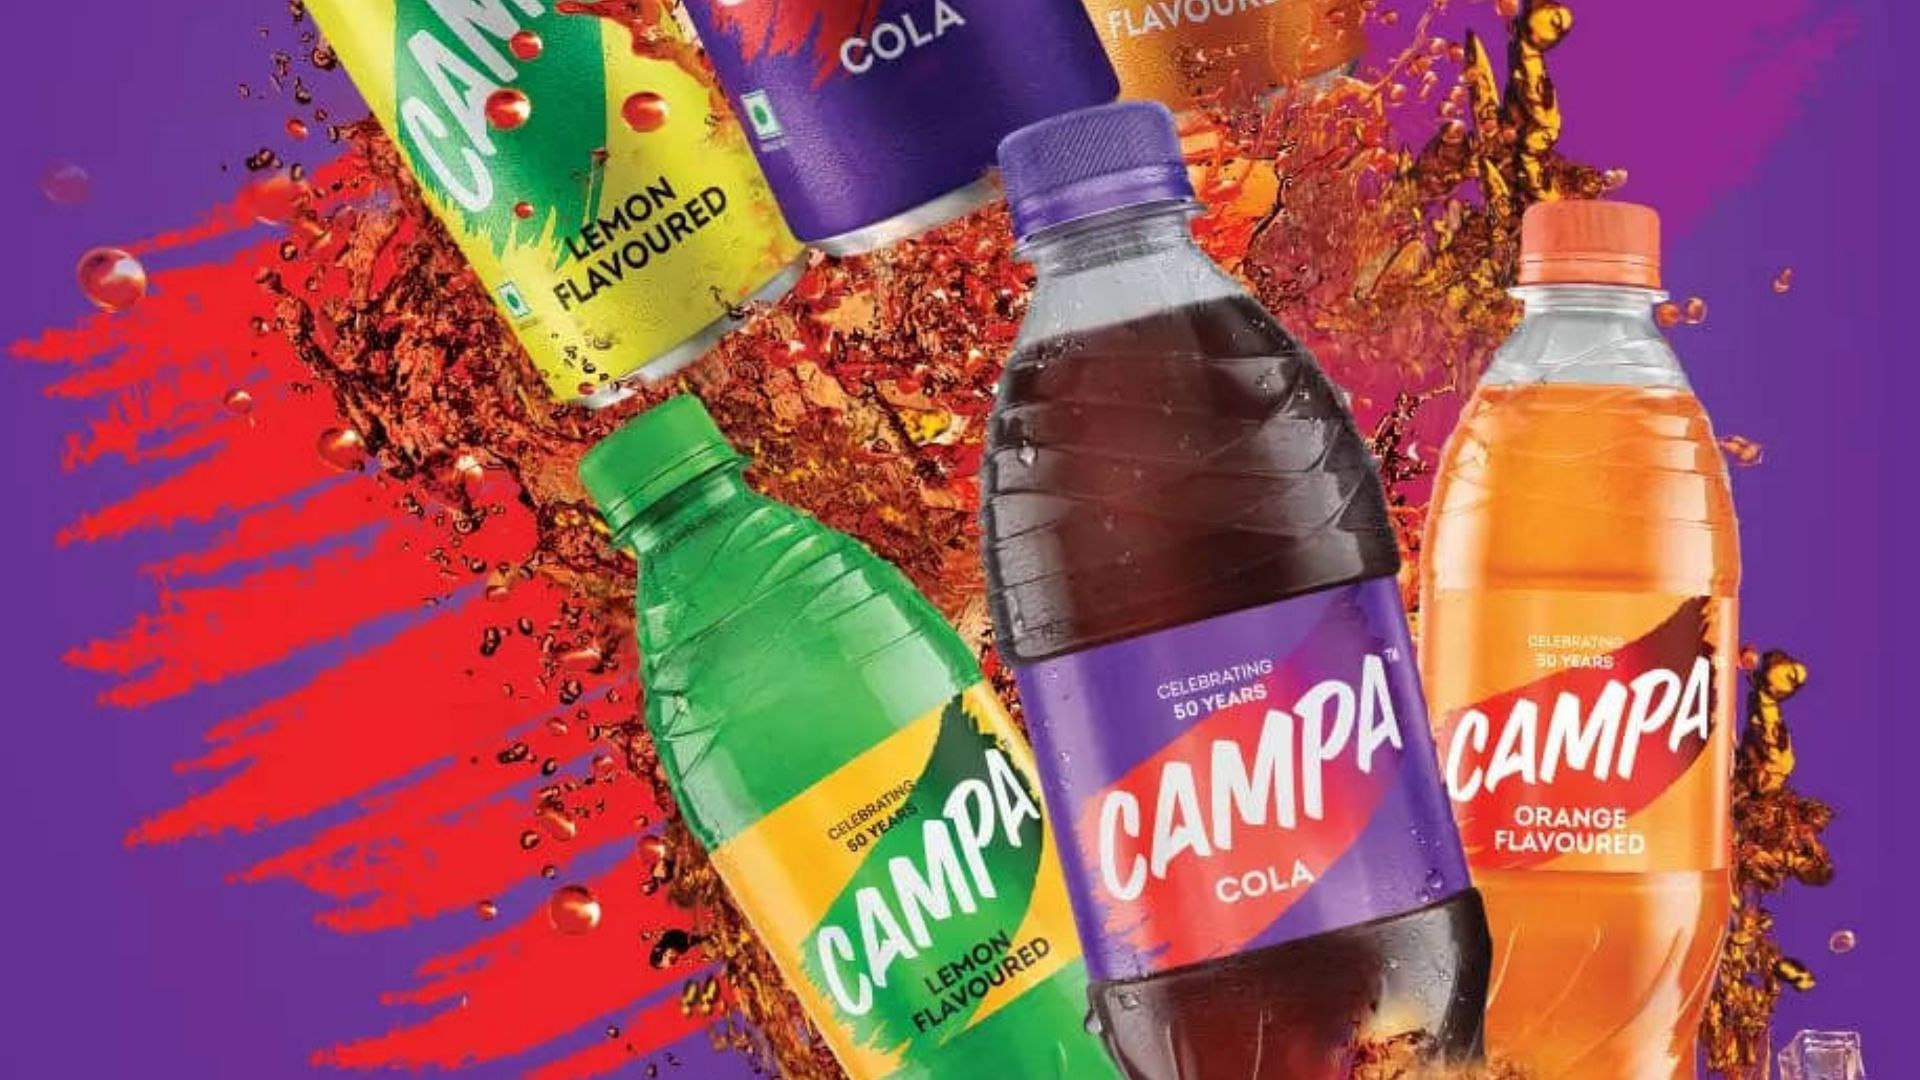 Campa Cola returns to the Indian market this summer (Image via Campa Cola/Reliance Group)